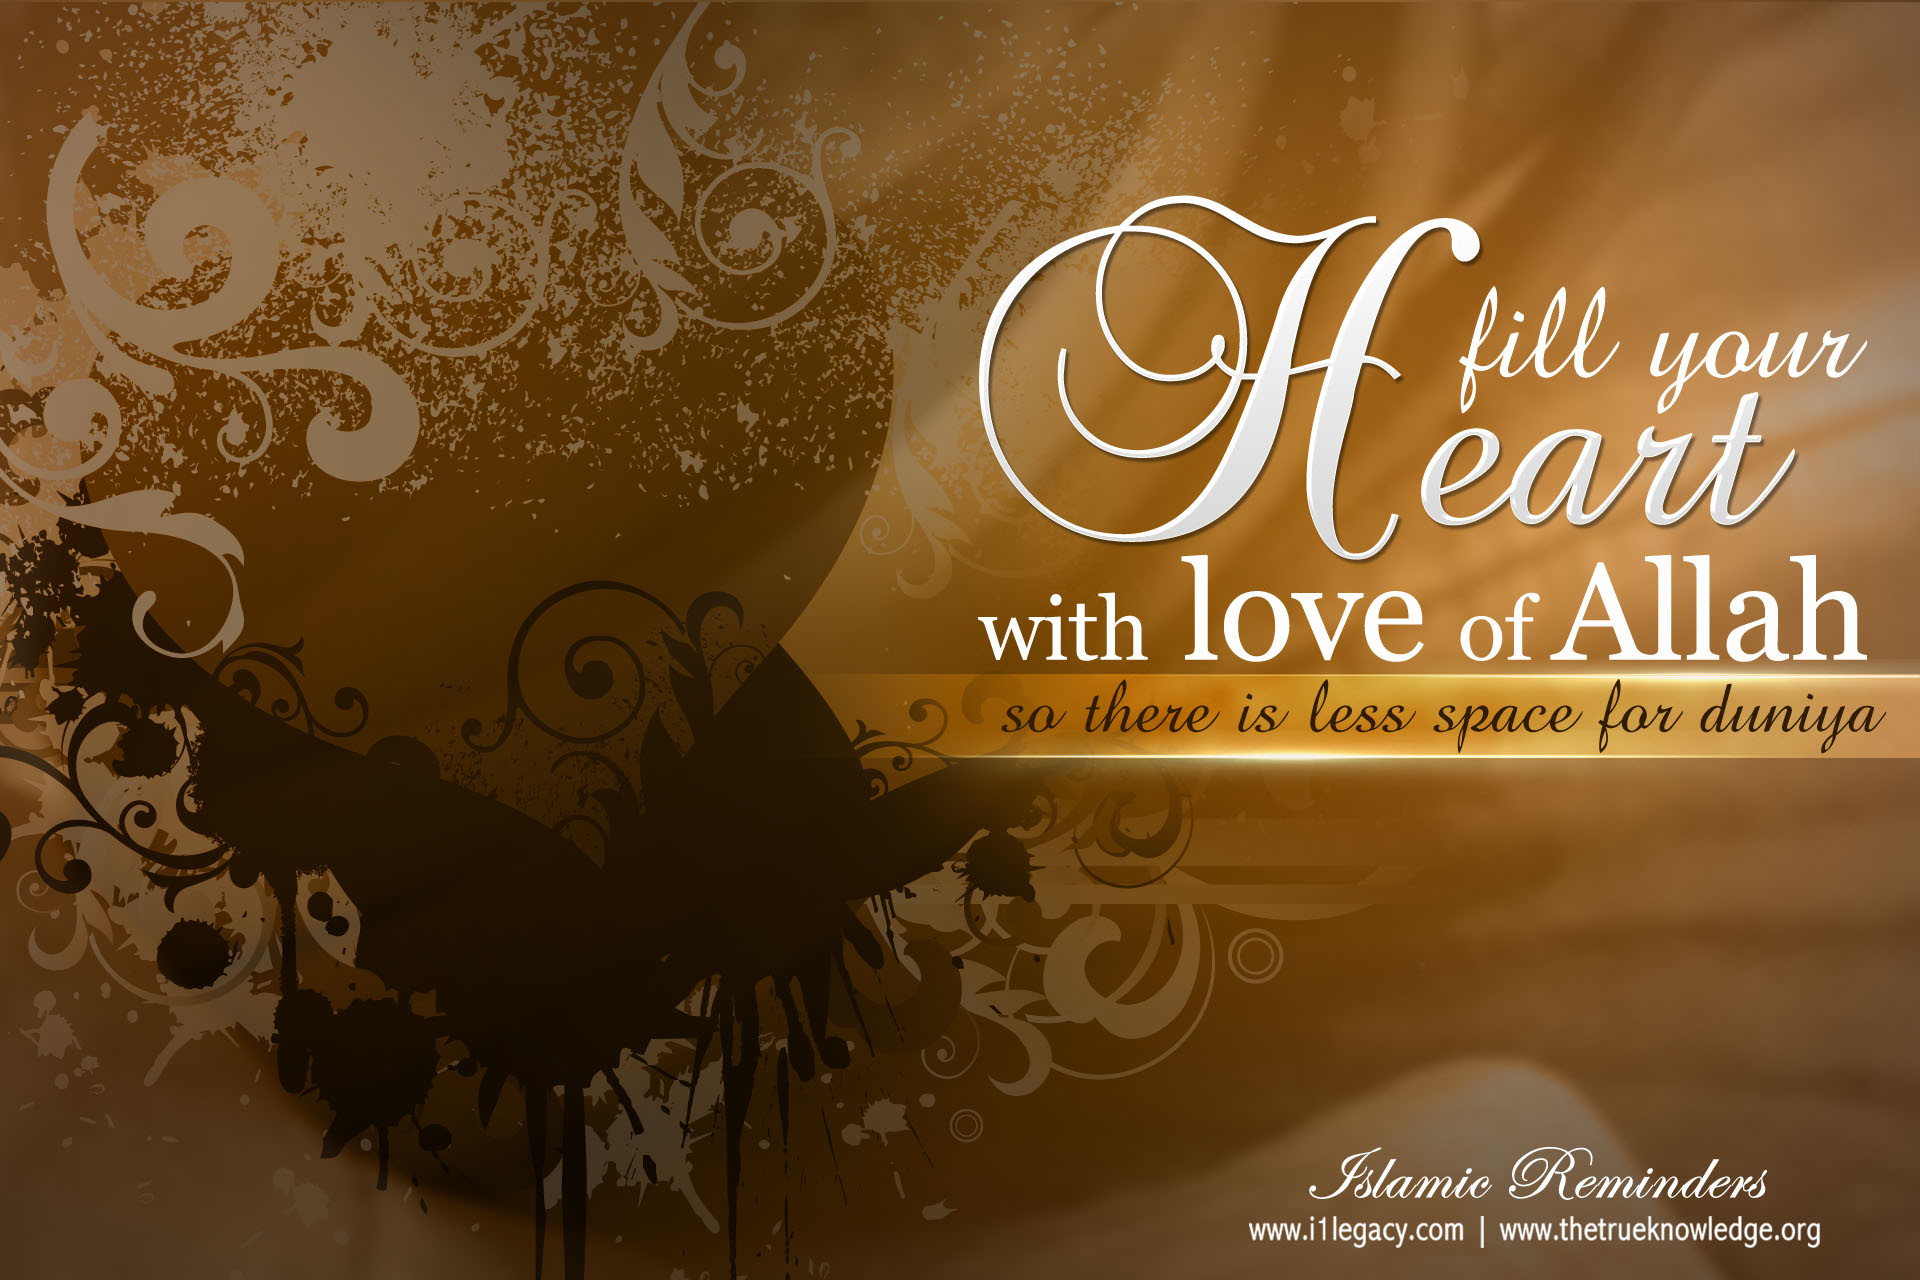 1920x1280 Fill your heart with love of Allah – Wallpaper